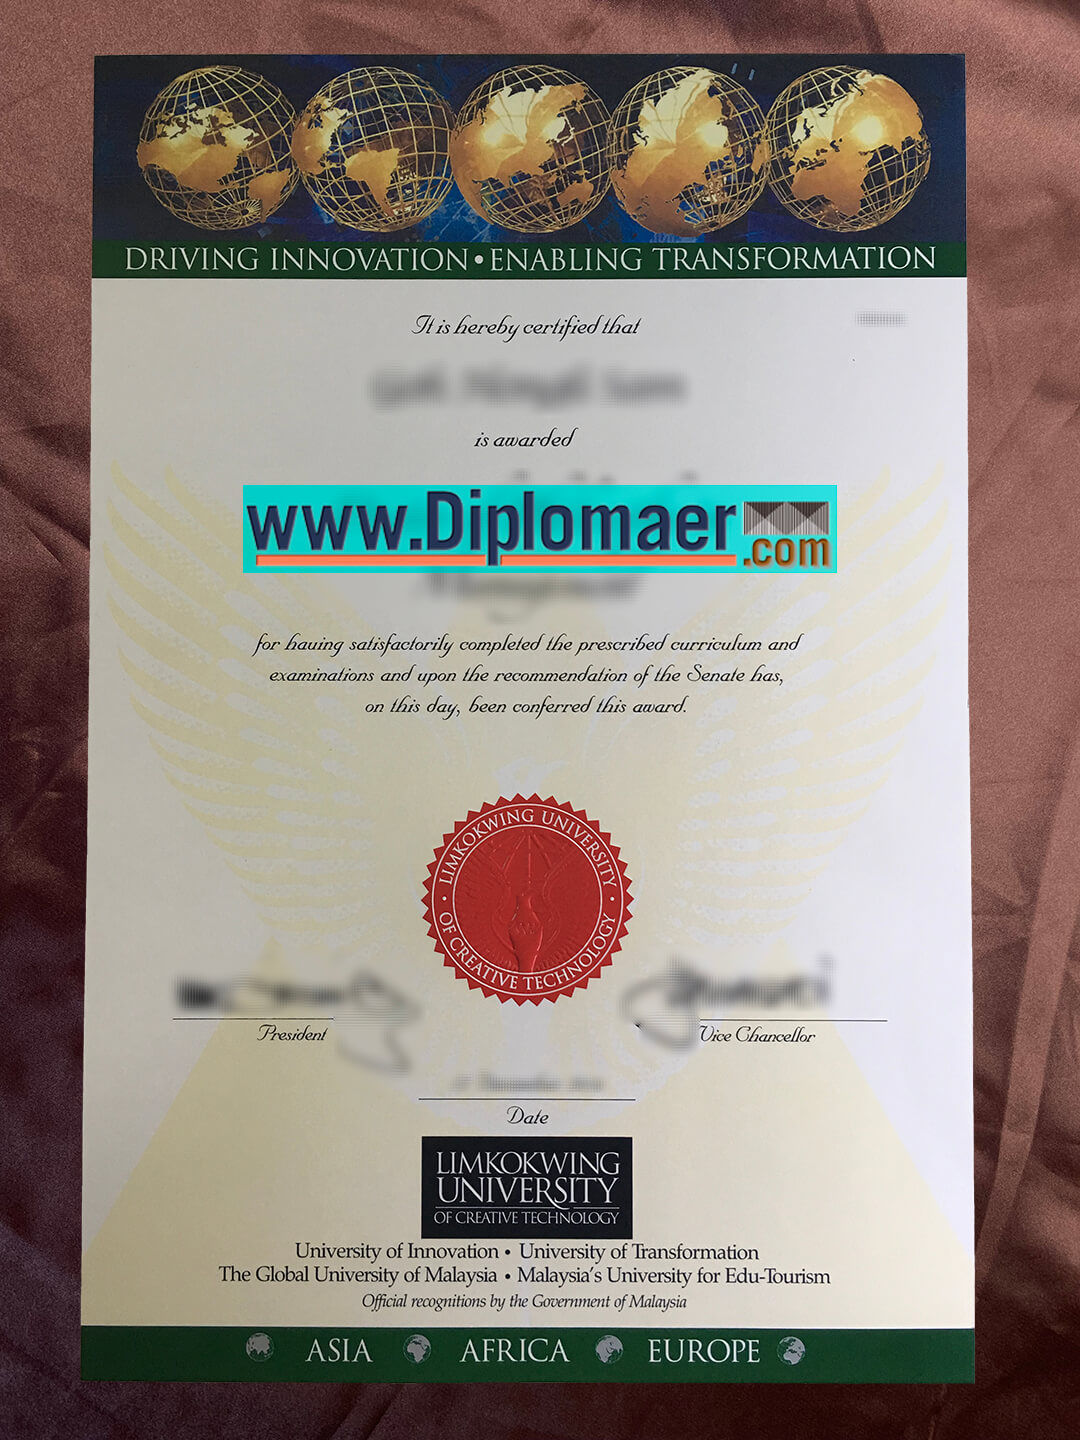 LIMKOWING University Fake Diploma - Would like to get a fake Limkokwing University of Creative Technology diploma?